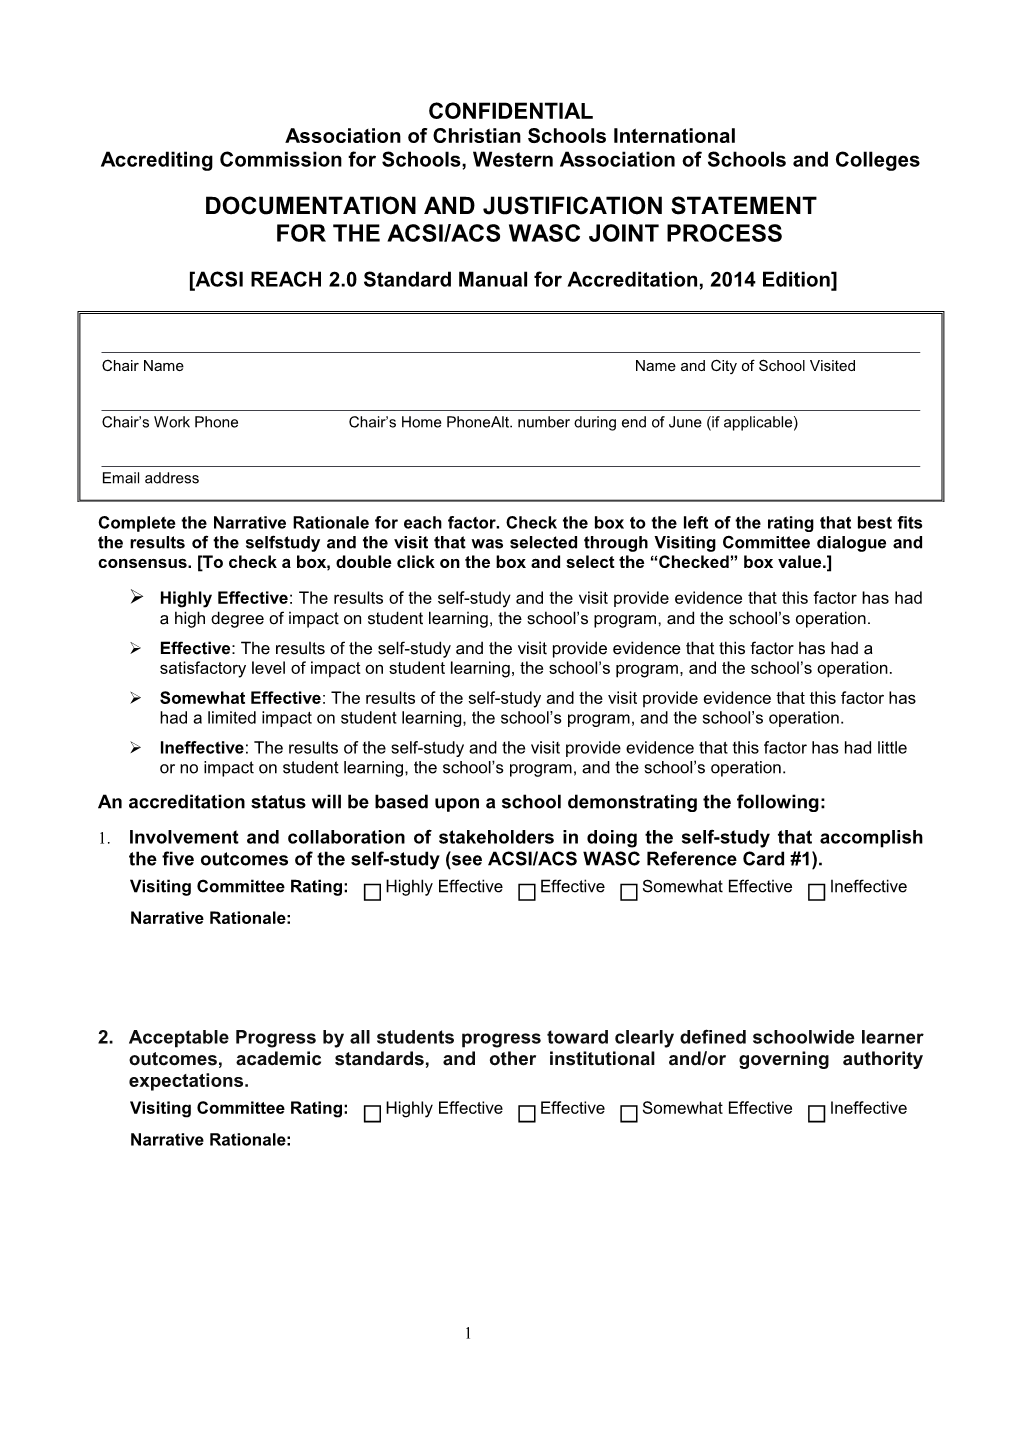 Documentation and Justification Statementfor the Acsi/Acs Wasc Joint Process